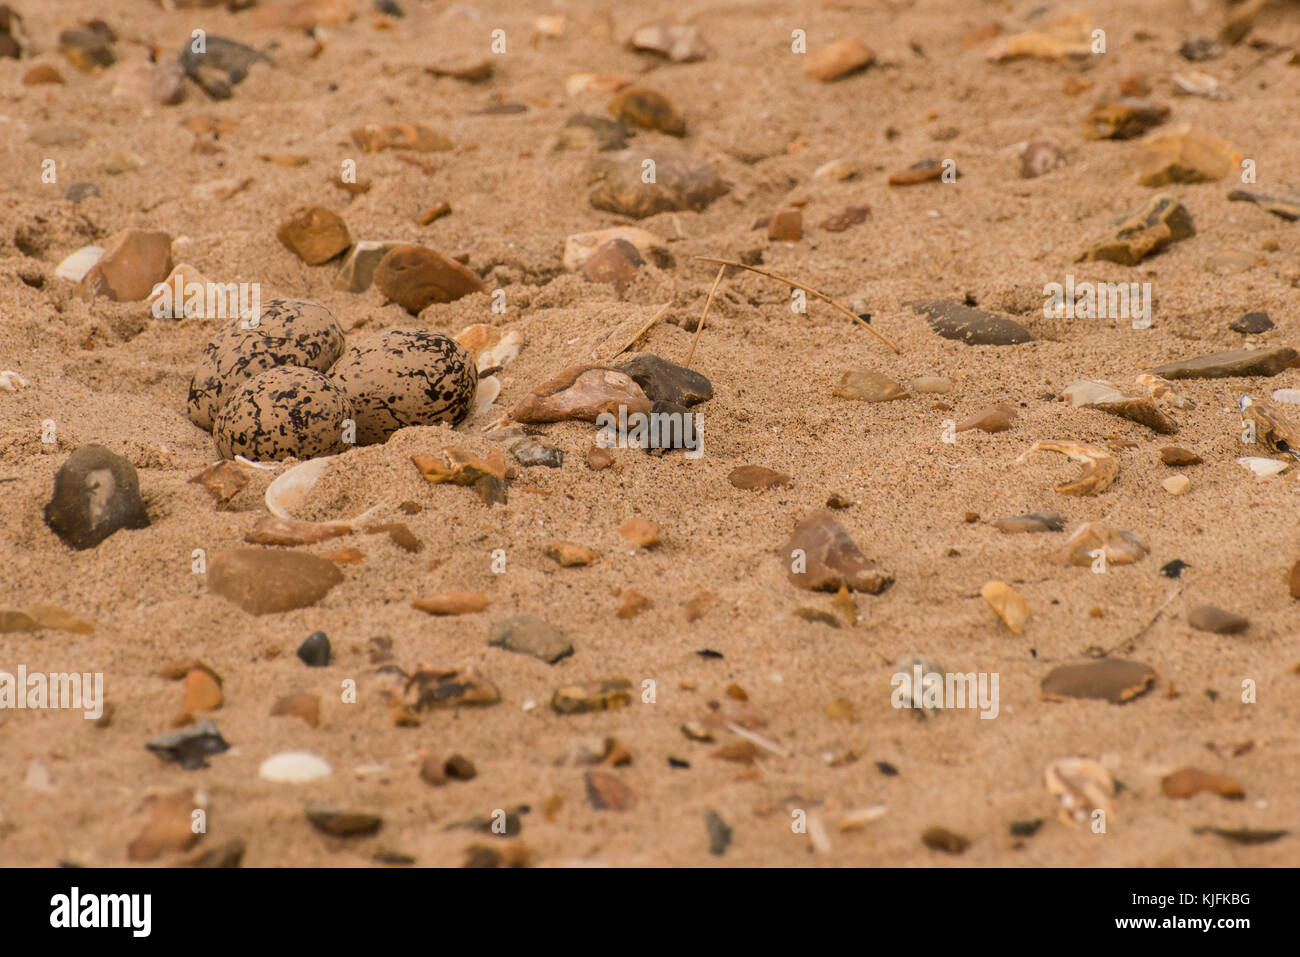 The nest of an oystercatcher is well camouflaged in the sand among bits of rock and shells.  However the eggs are still vulnerable to disturbance. Stock Photo